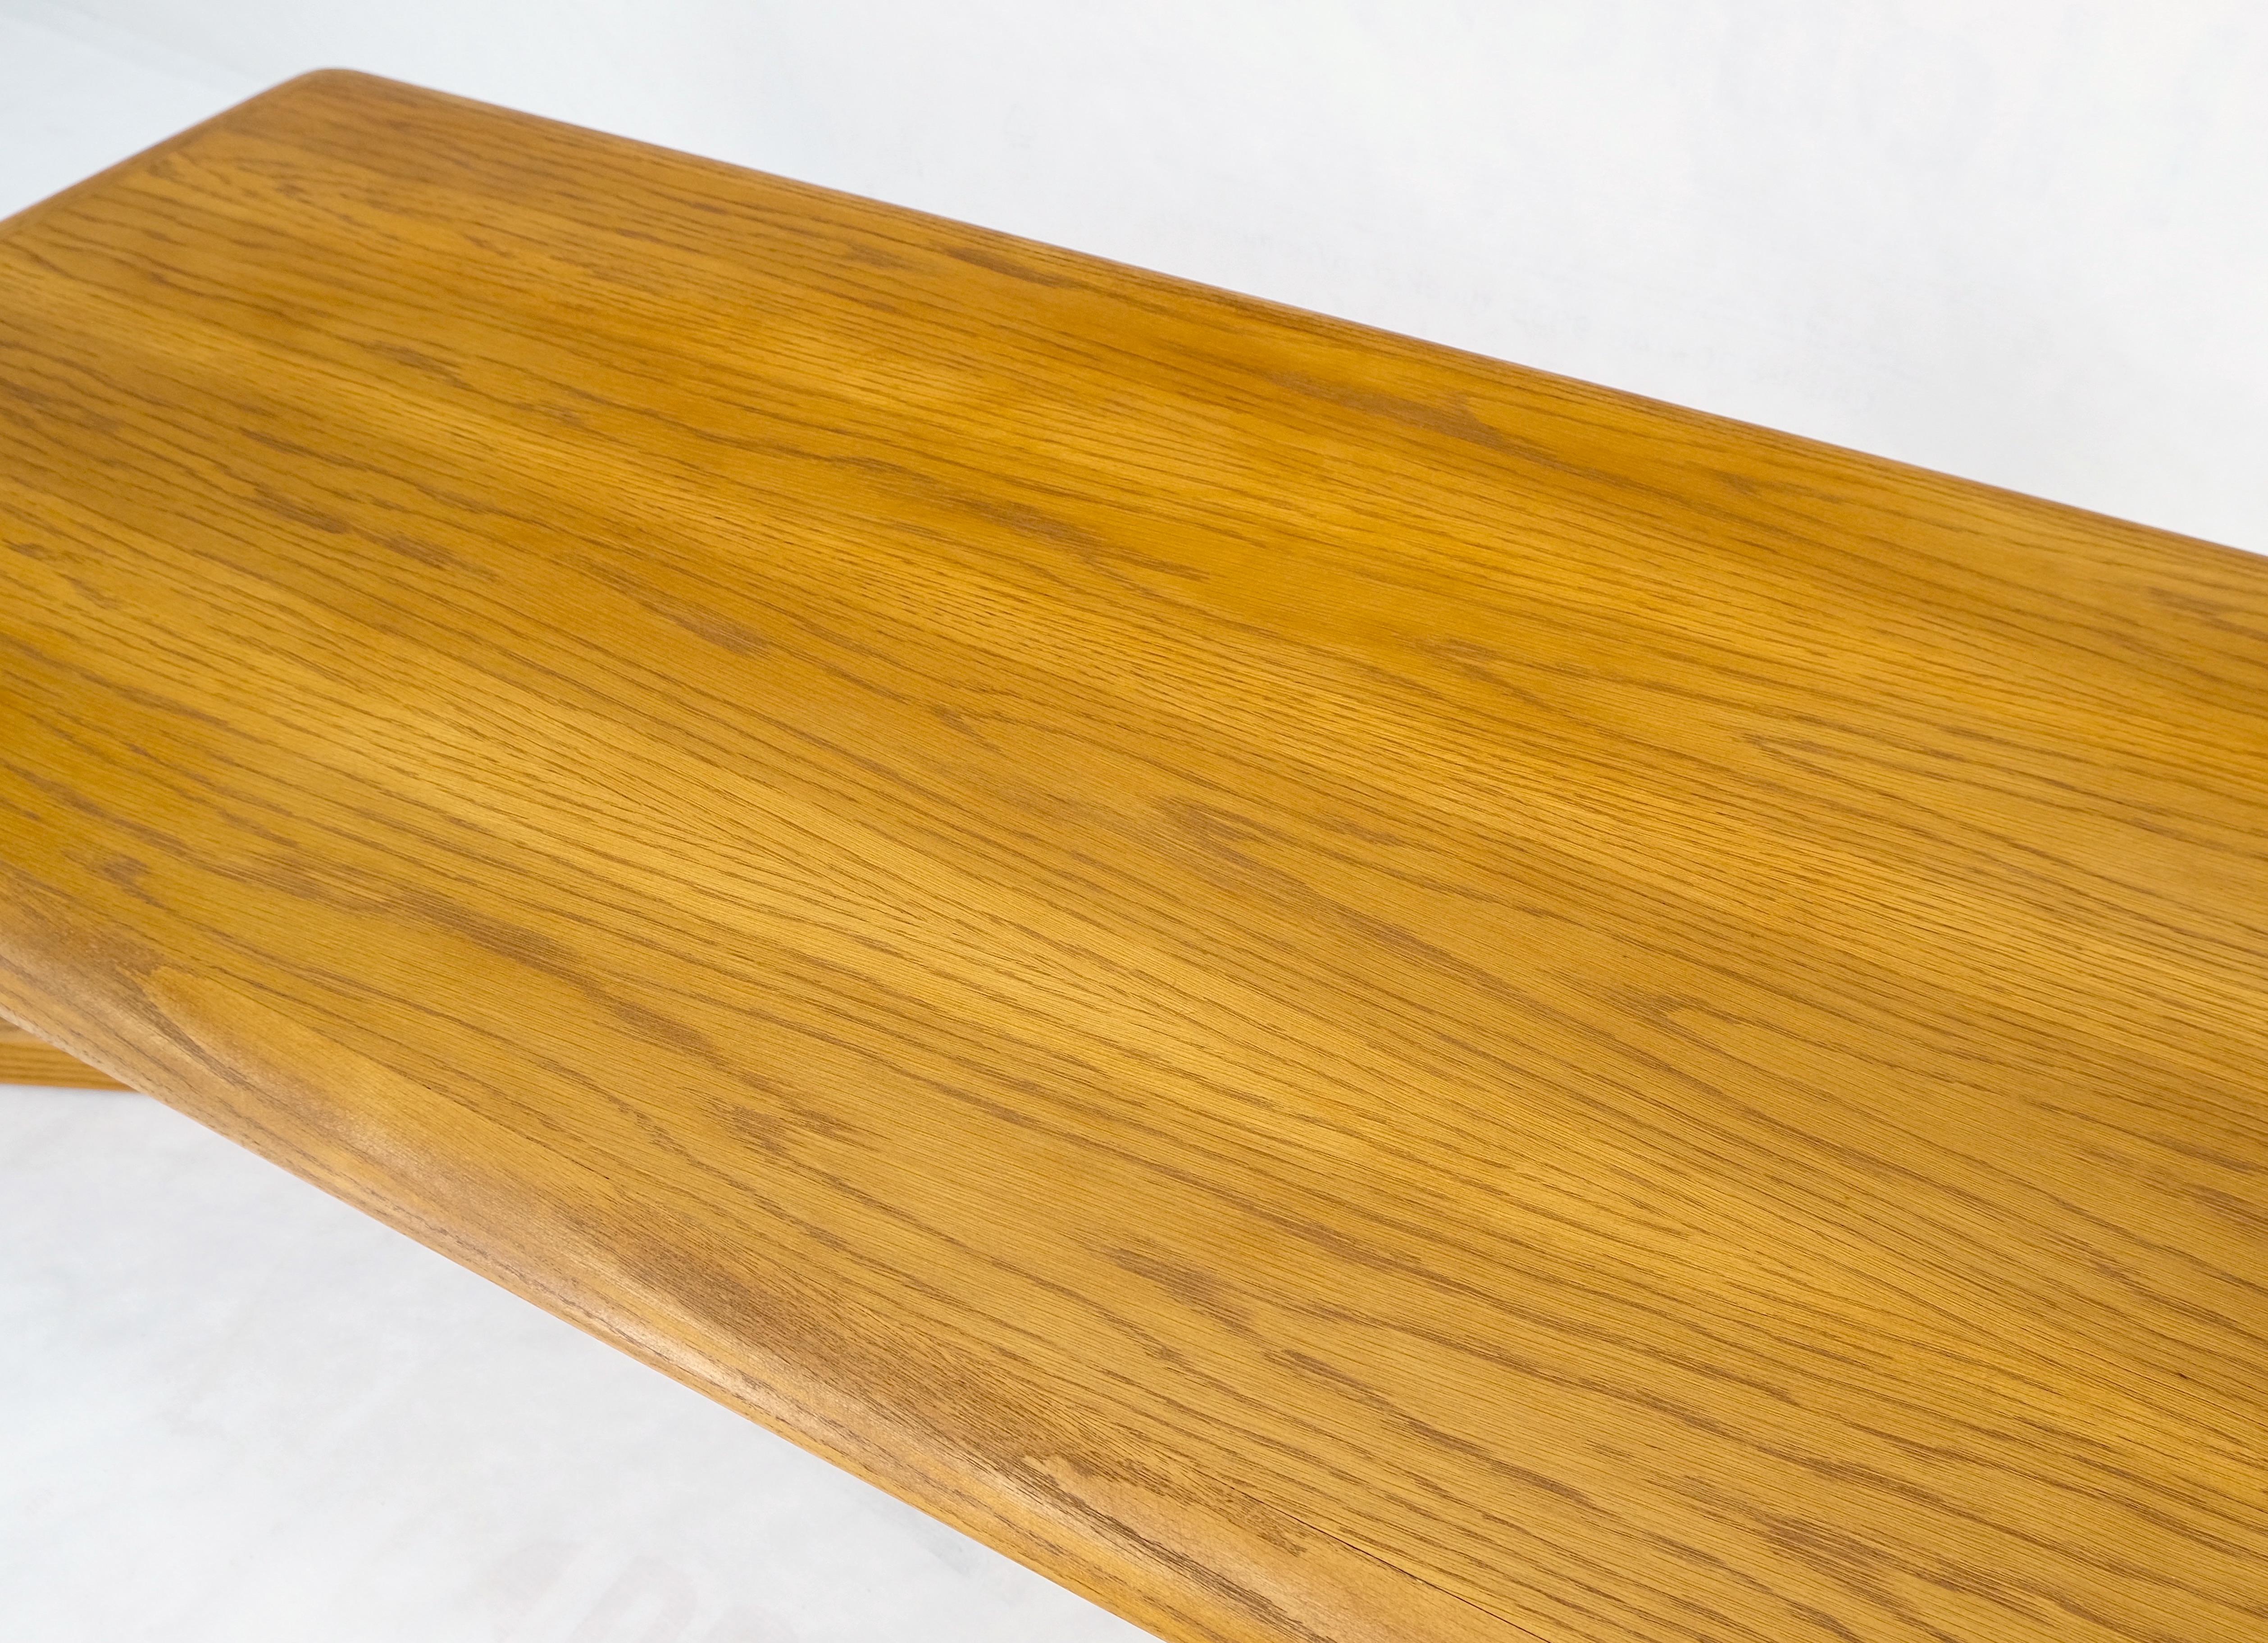 Restored x Base Rectangle Chestnut Coffee Table by Lane Mid-Century Modern Mint! For Sale 4